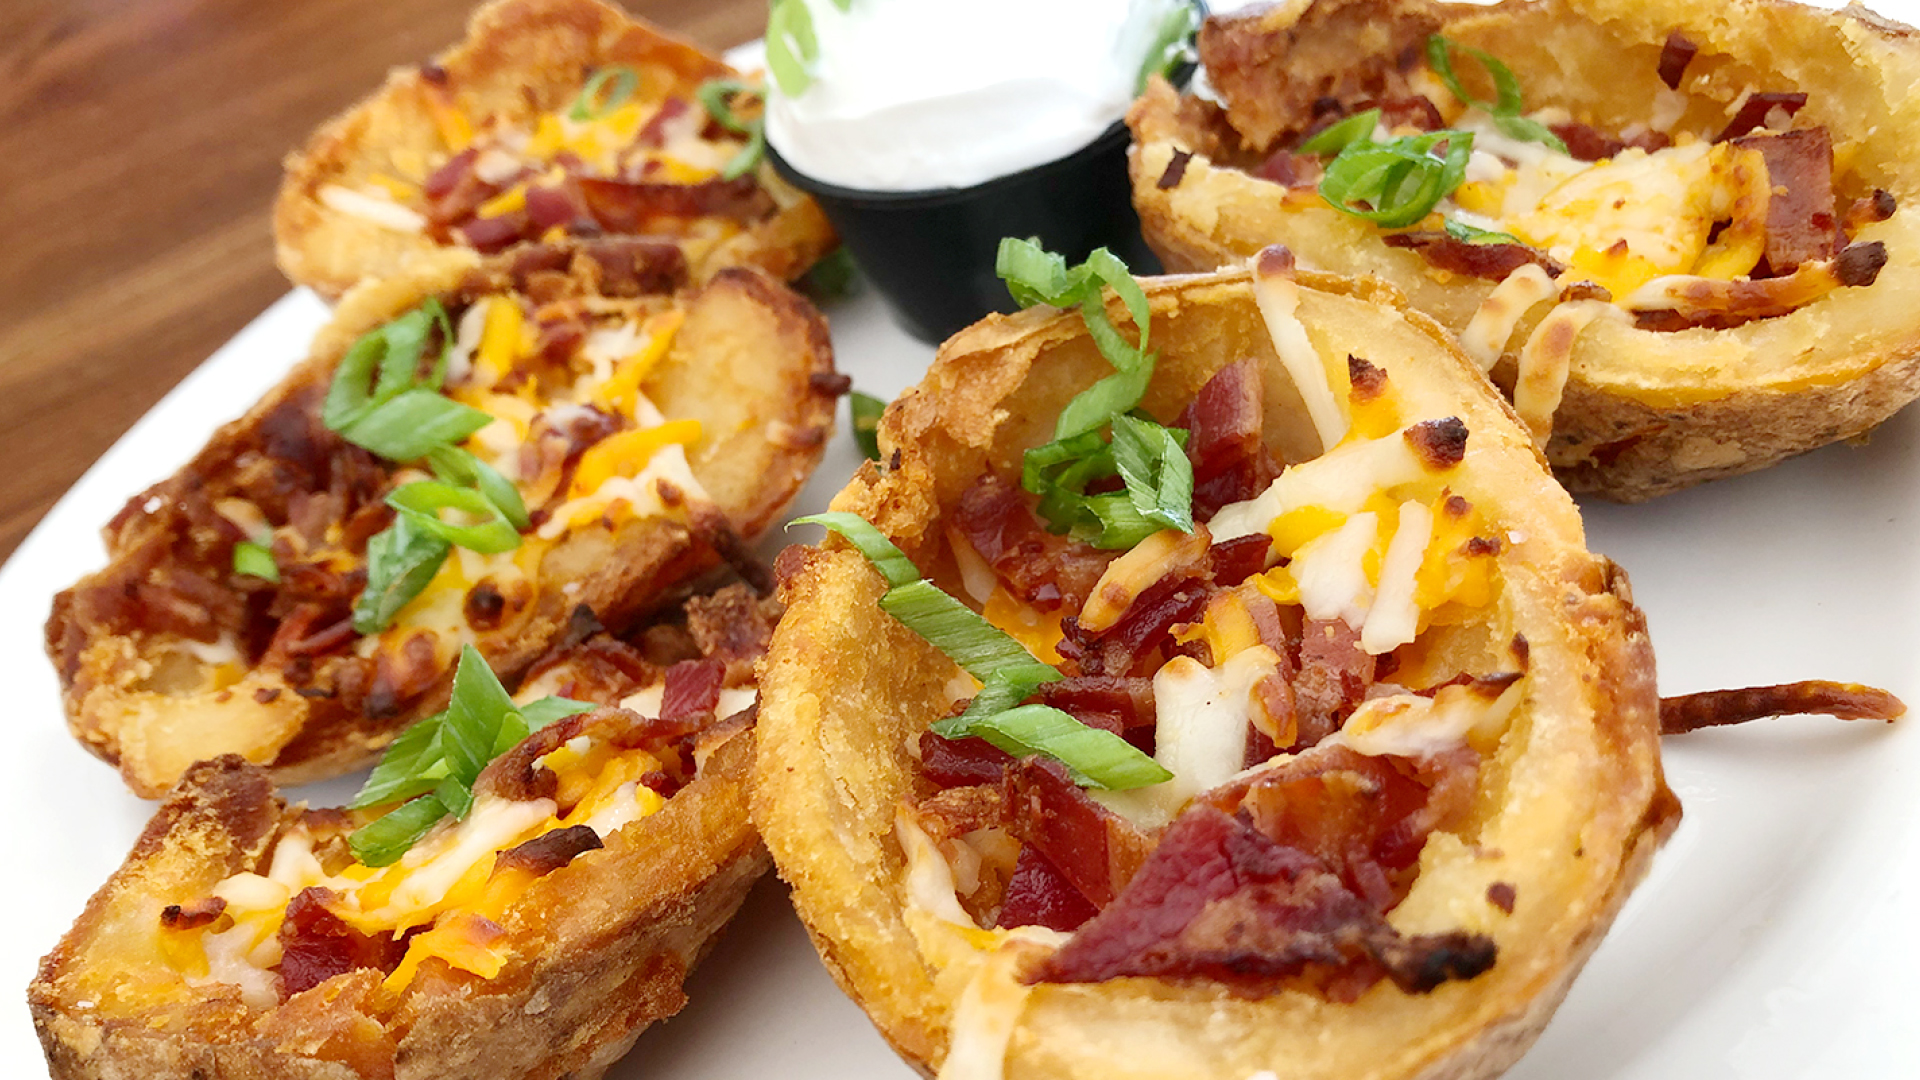 Five potato skins topped with melted shredded cheese, bacon pieces and green scallions on a white plate with a small soufflé cup of sour cream.